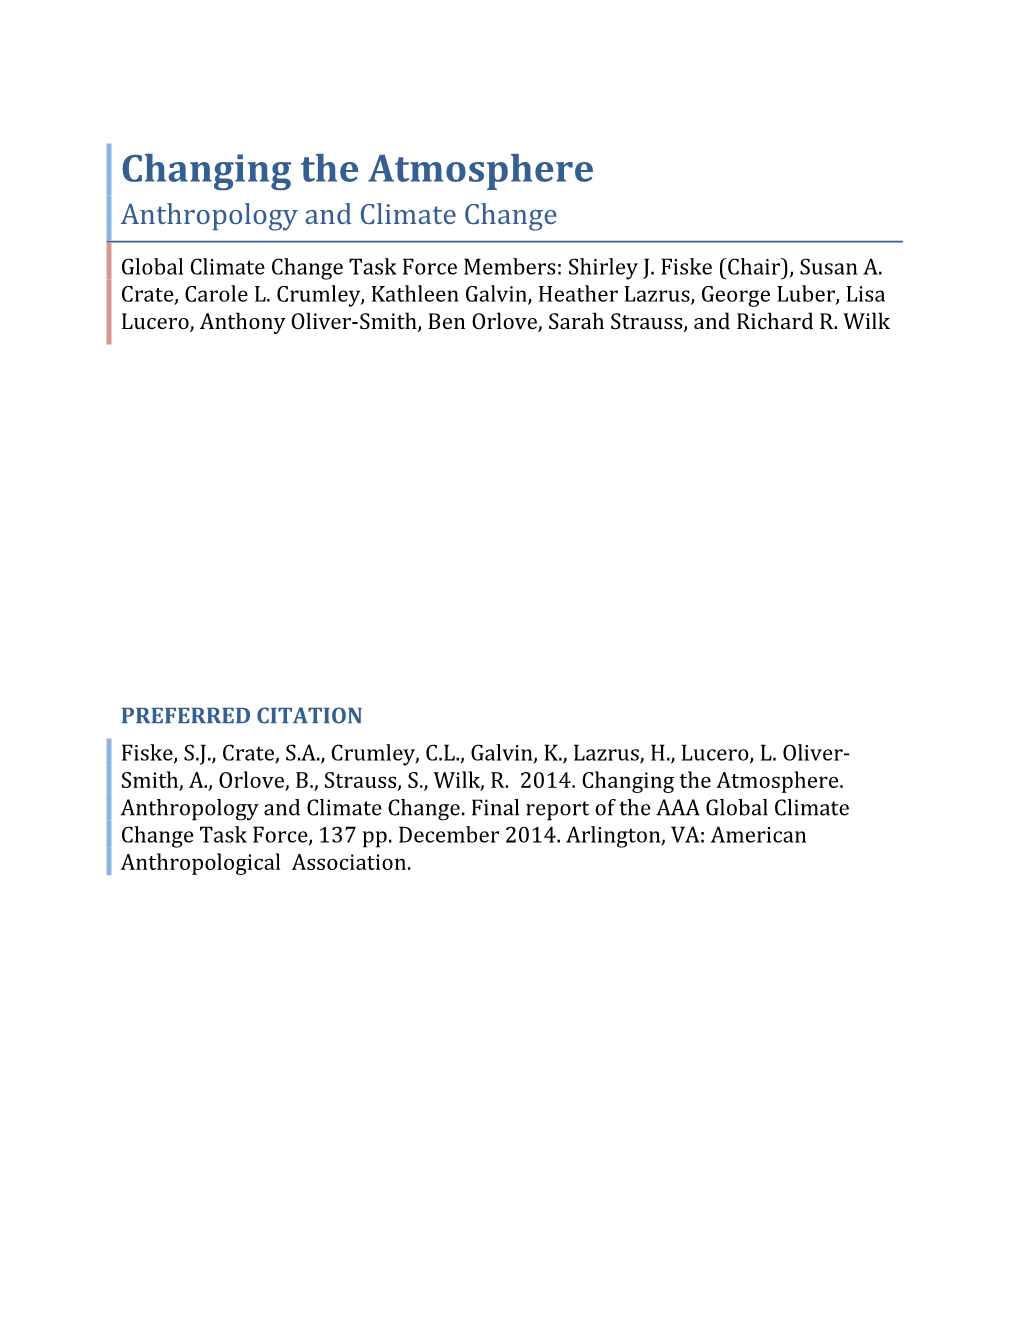 Changing the Atmosphere: Anthropology and Climate Change” Is the Final Report of the American Anthropological Association’S (AAA) Global Climate Change Task Force